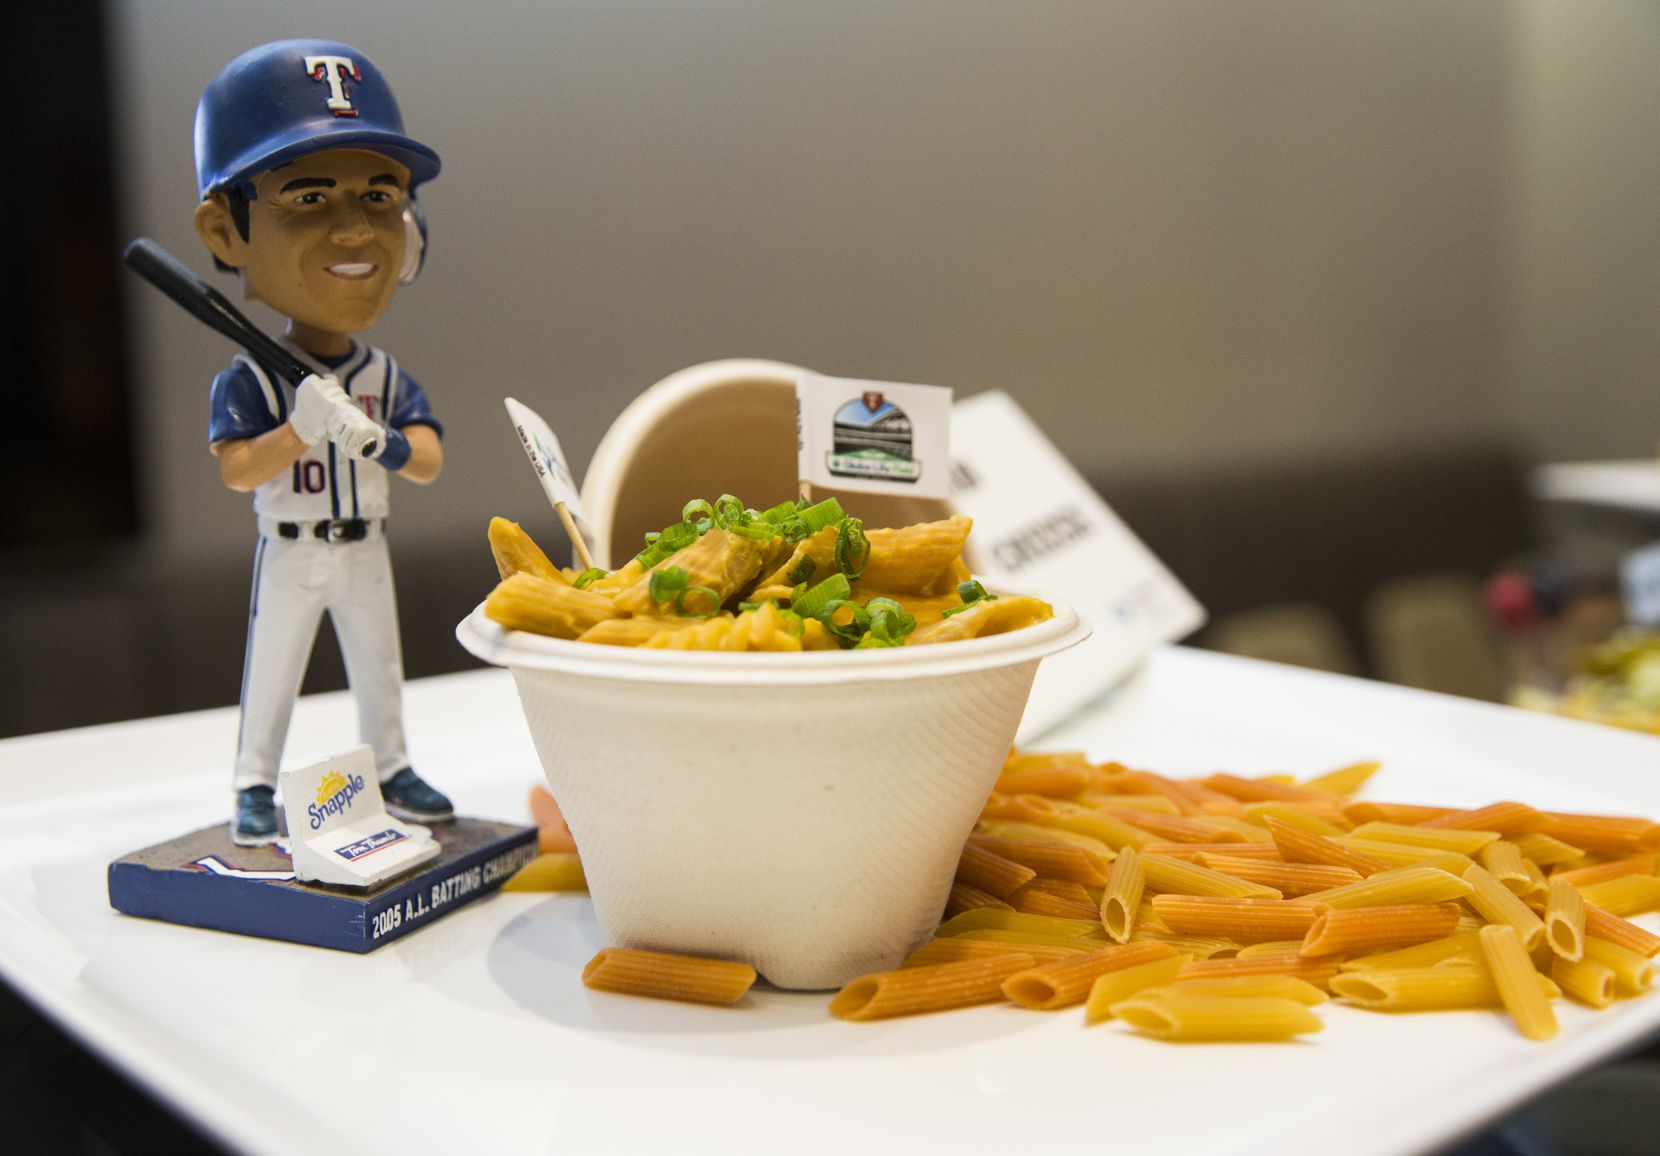 Time fries by when you're at Globe Life - Globe Life Field